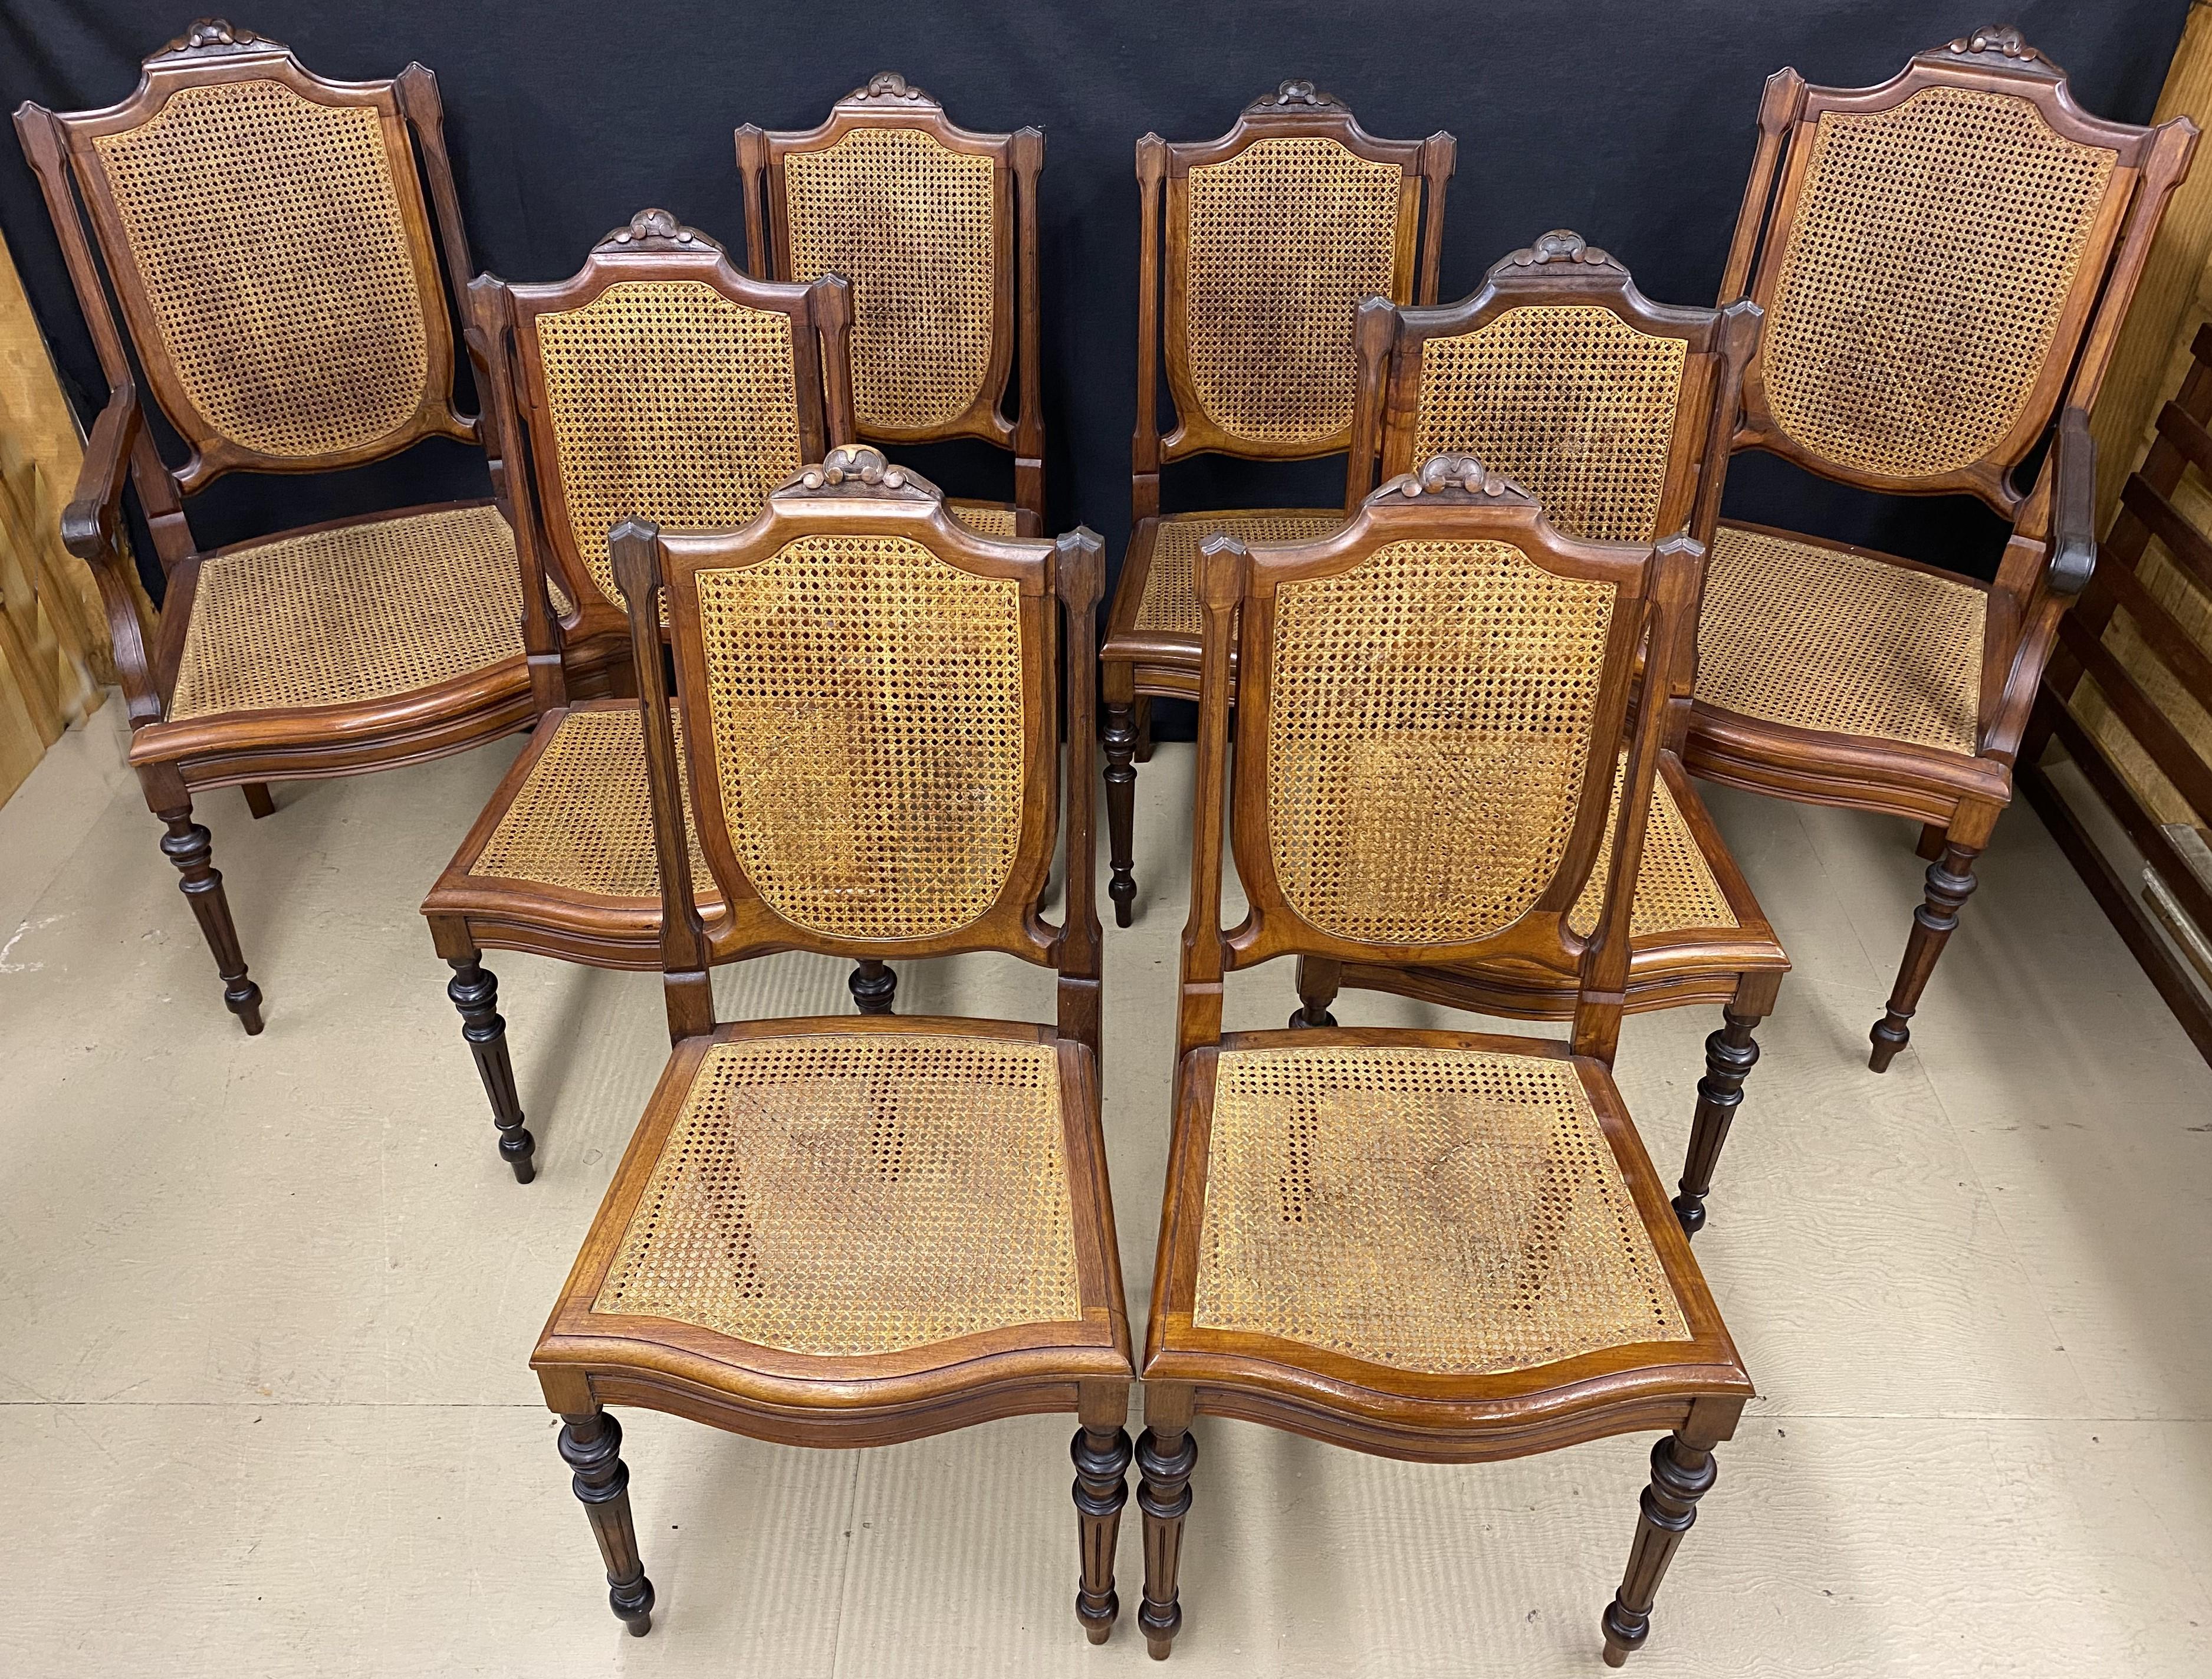 A fine set of eight Brazilian carved Jacaranda dining chairs, two arm chairs and six side chairs, with caned seats and backs, carved crests, shaped seat rails, and tapered round turned and reeded legs. Each chair comes with a reversible custom